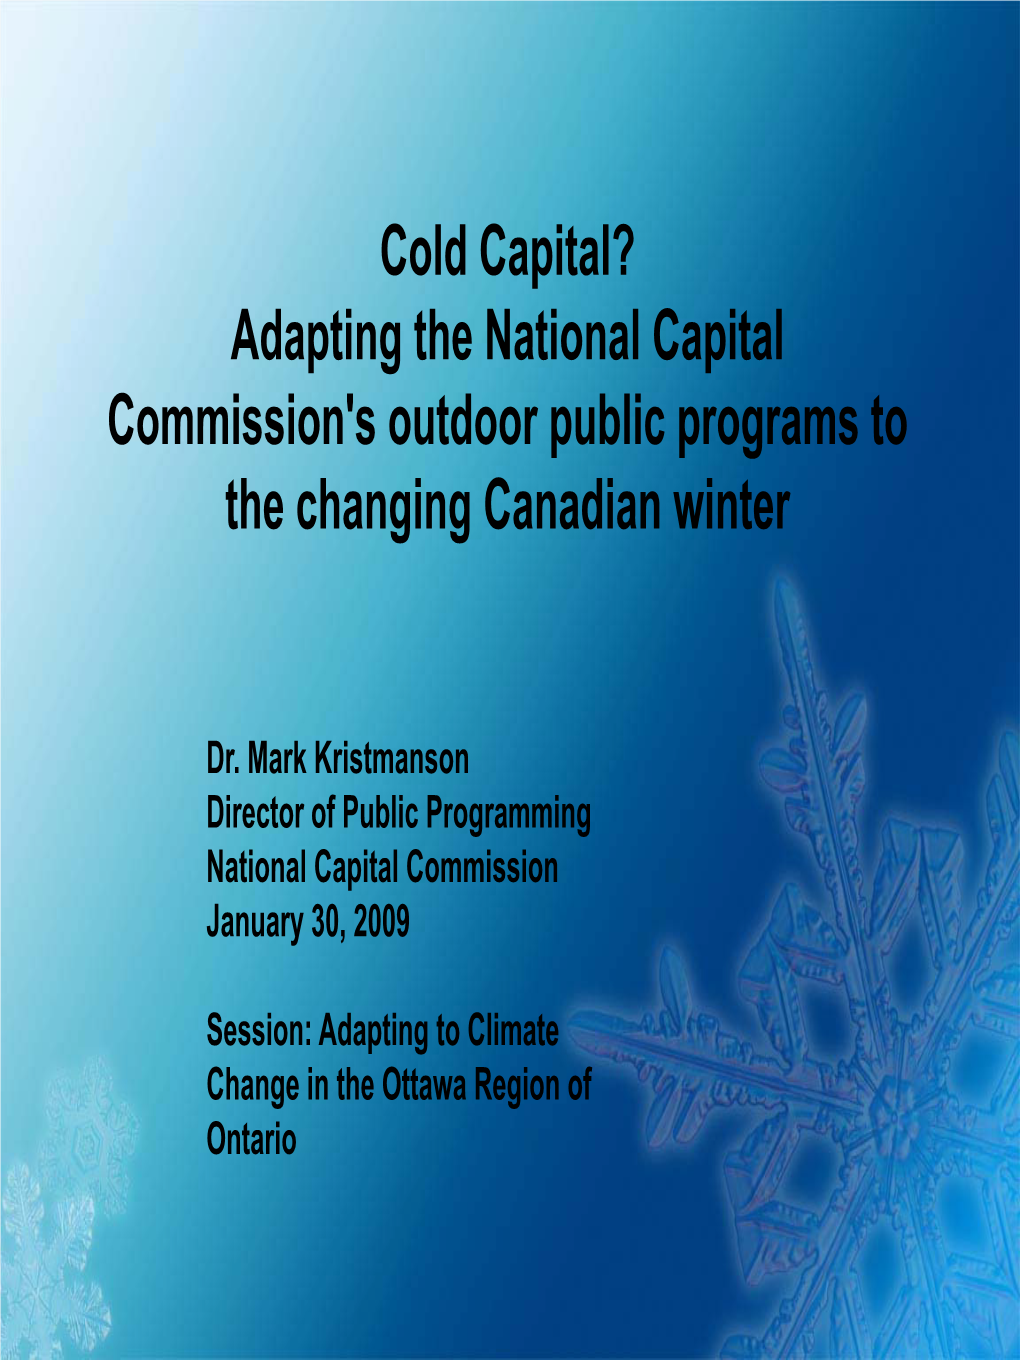 Adapting the National Capital Commission's Outdoor Public Programs to the Changing Canadian Winter